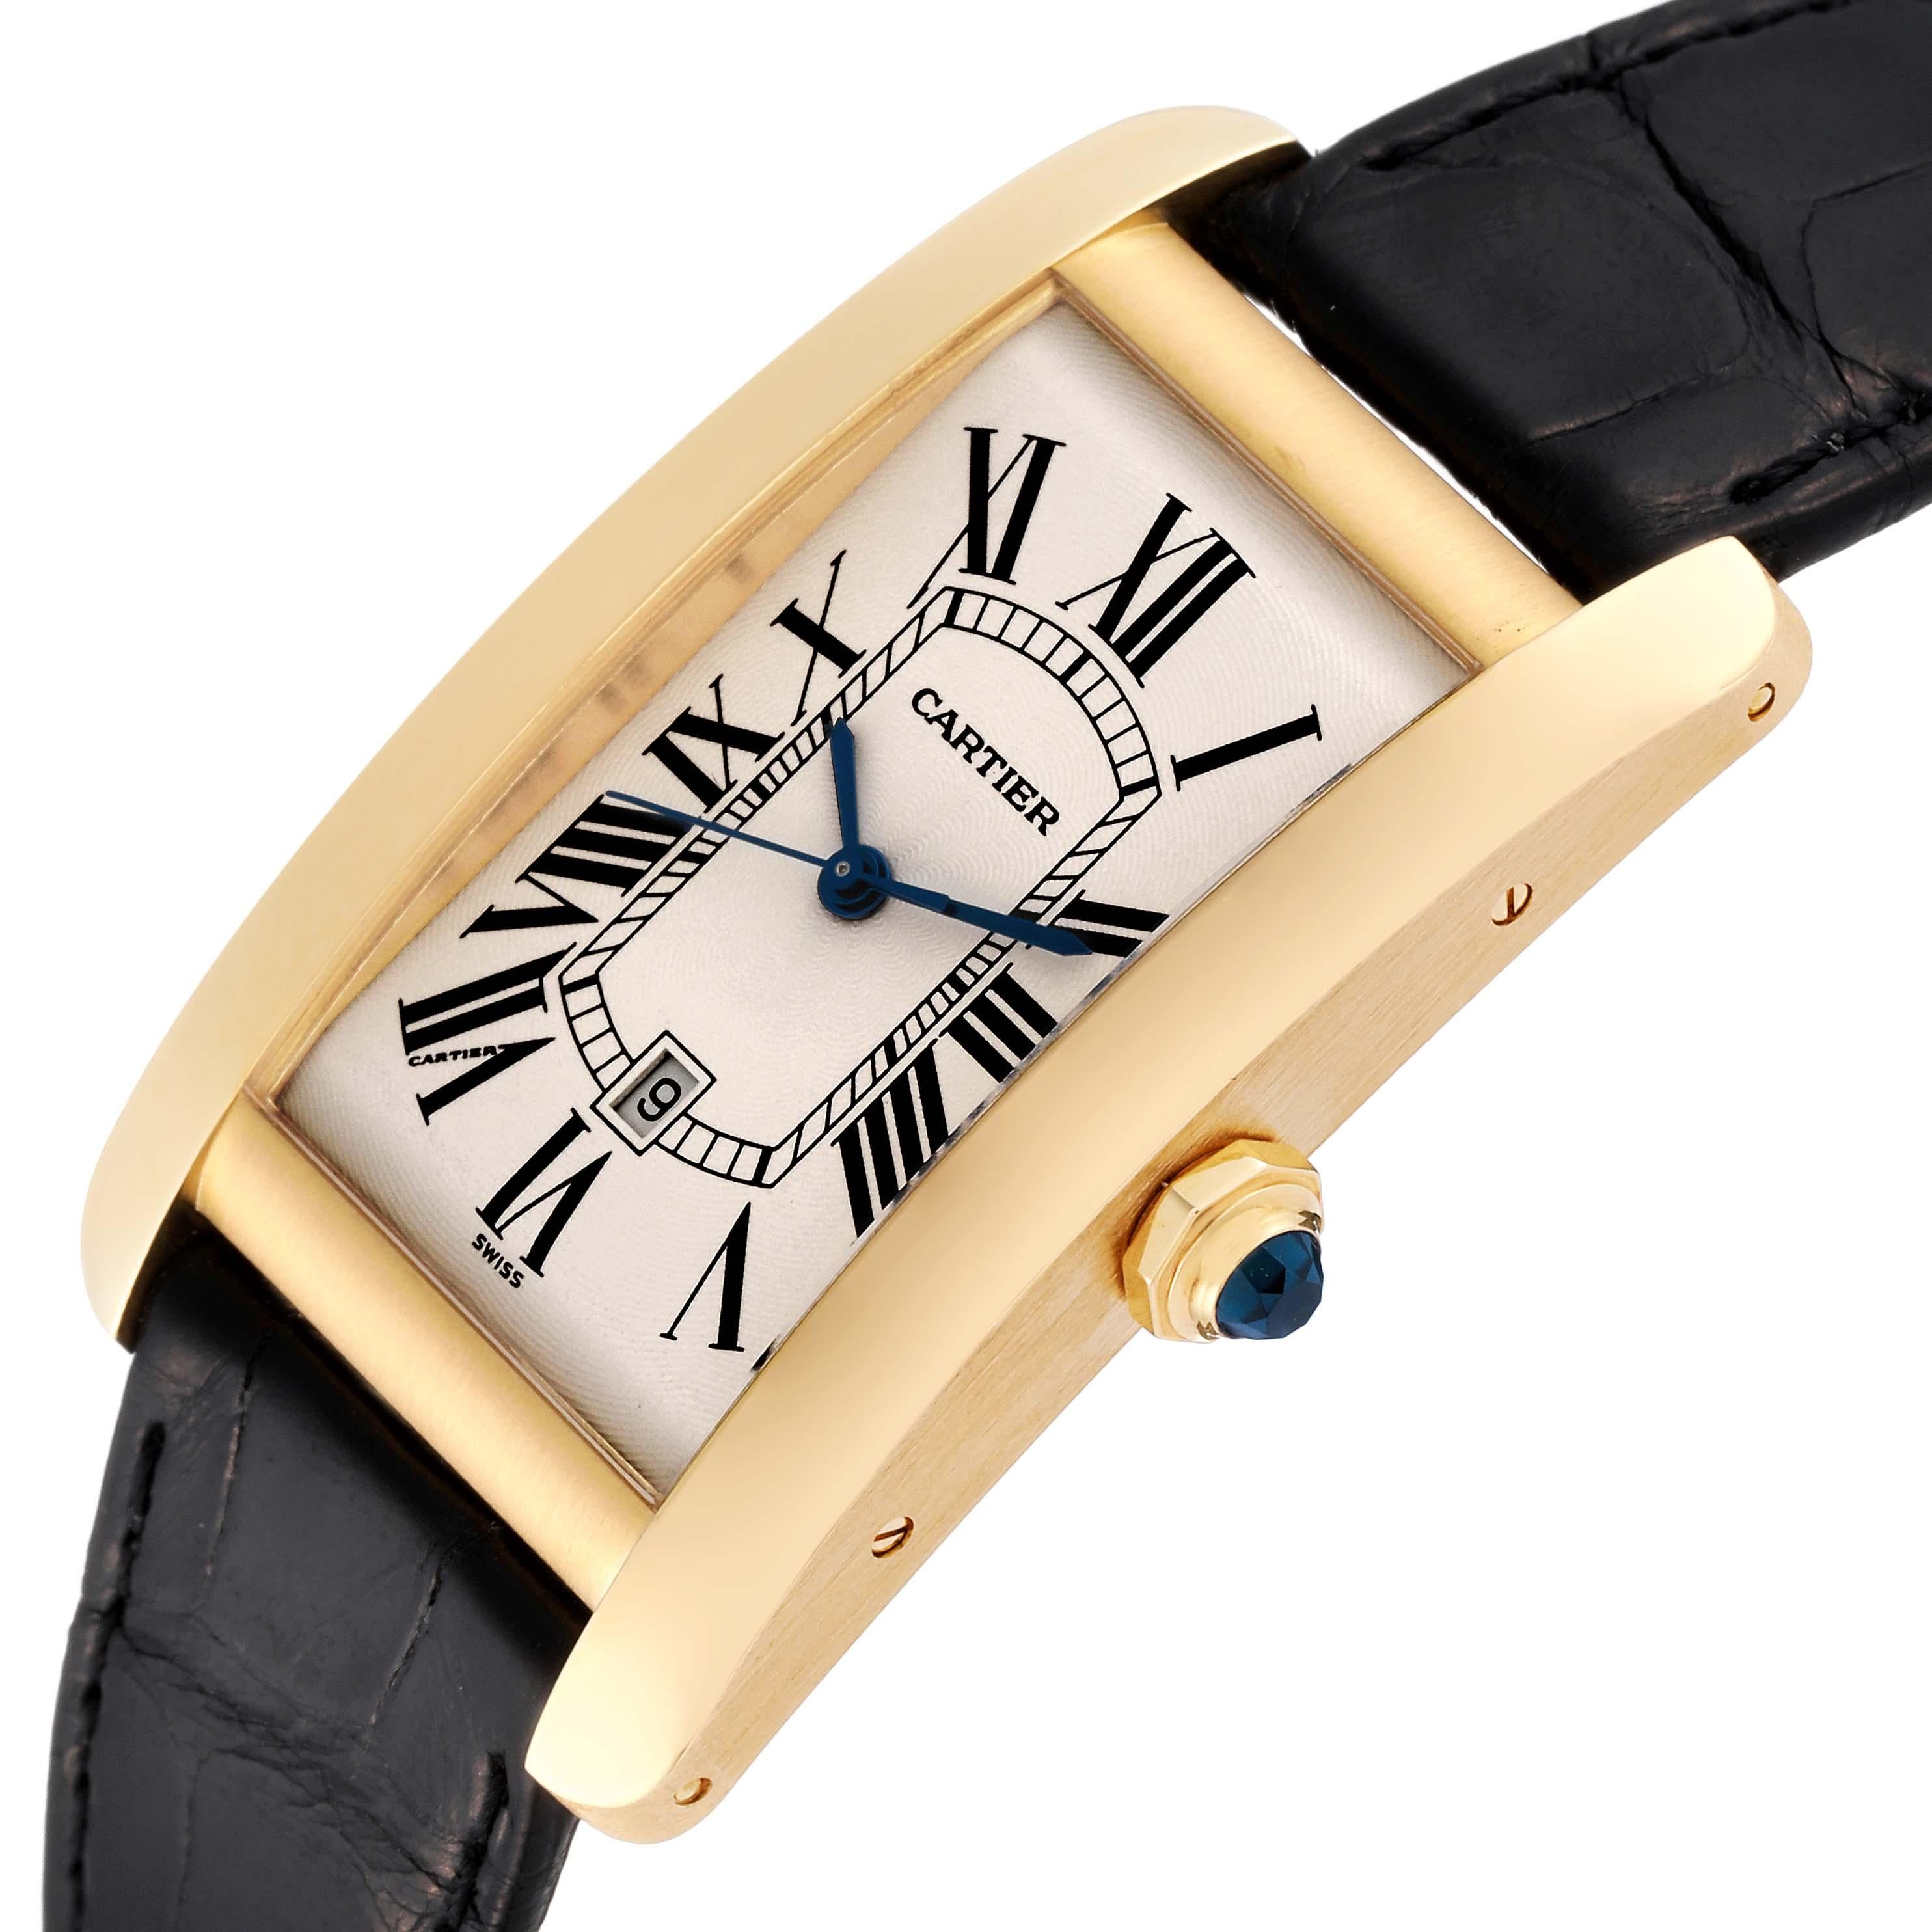 Cartier Tank Americaine Yellow Gold Automatic Mens Watch W2603156 Box Papers. Automatic self-winding movement. 18K yellow gold case 26.6 x 45.1 mm. Octagonal crown set with faceted blue sapphire. . Scratch resistant sapphire crystal. Silvered